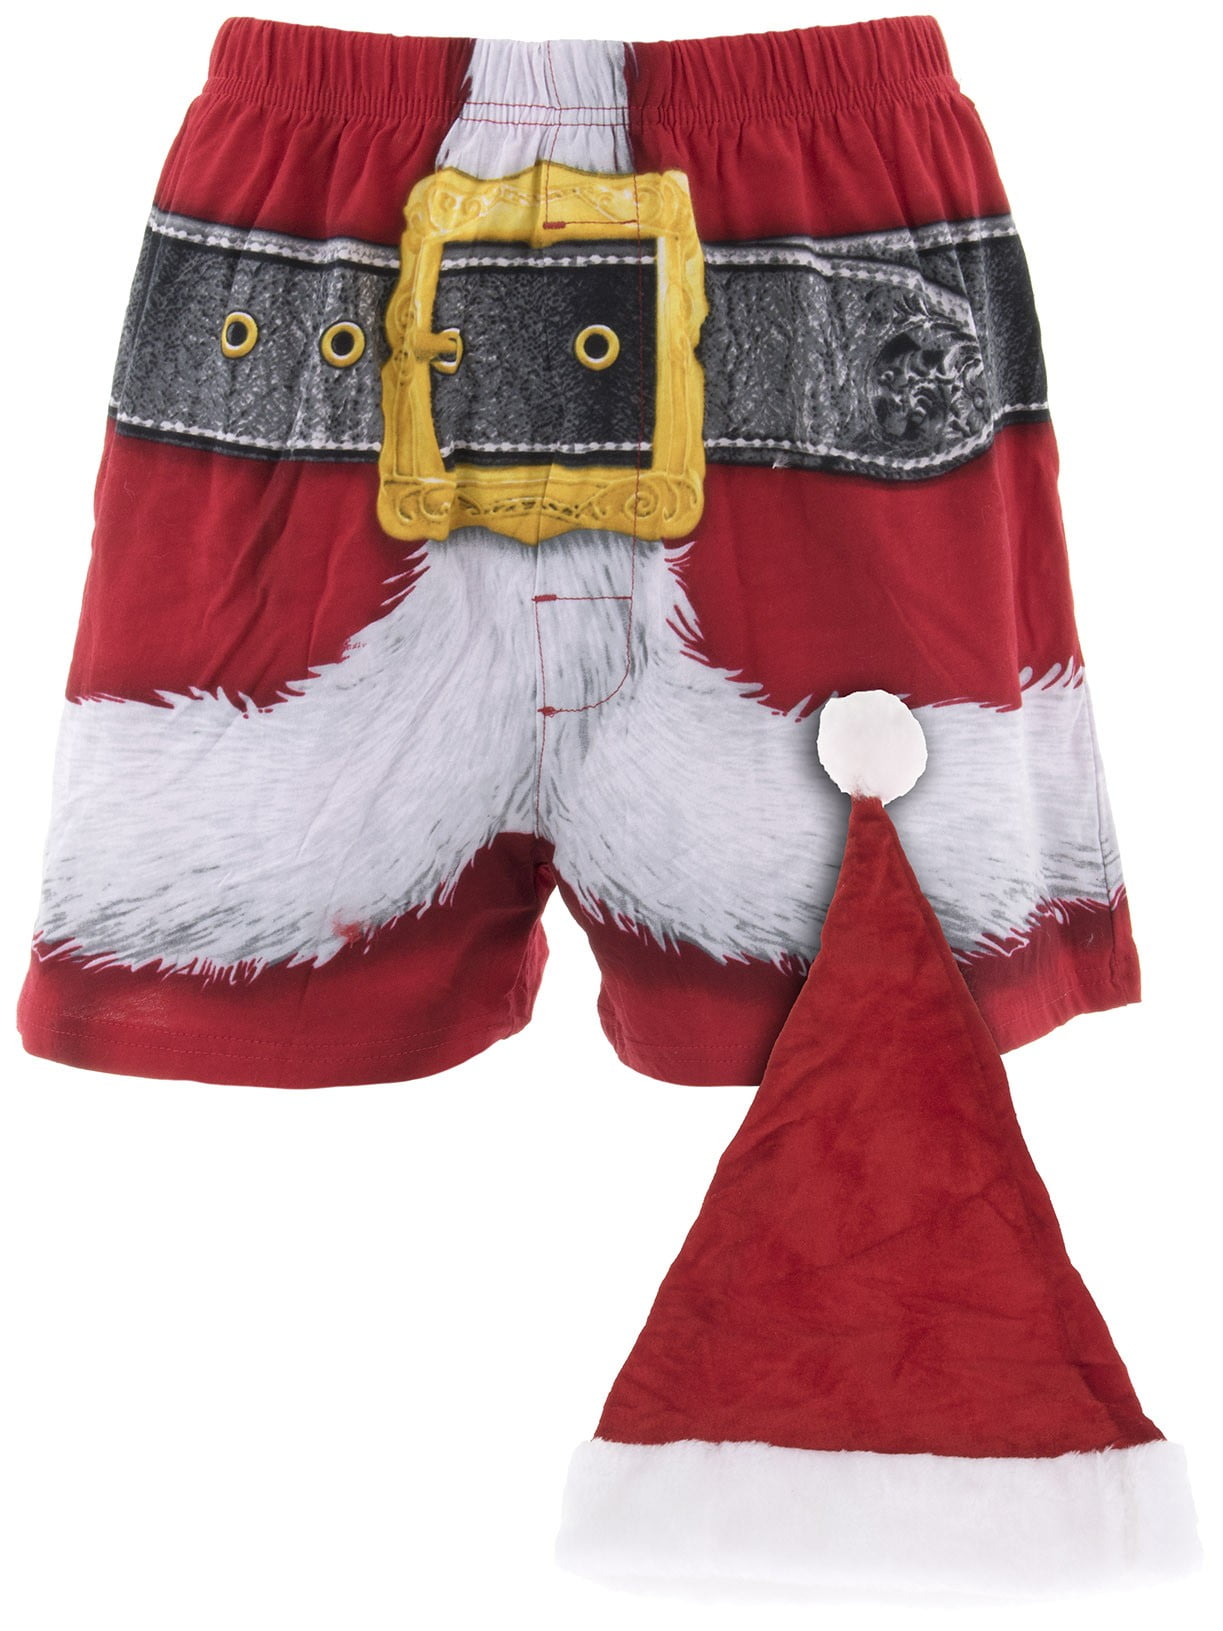 Briefly Stated Mens Deadpool Deck The Halls Christmas Performance Boxer Brief 2 Pack